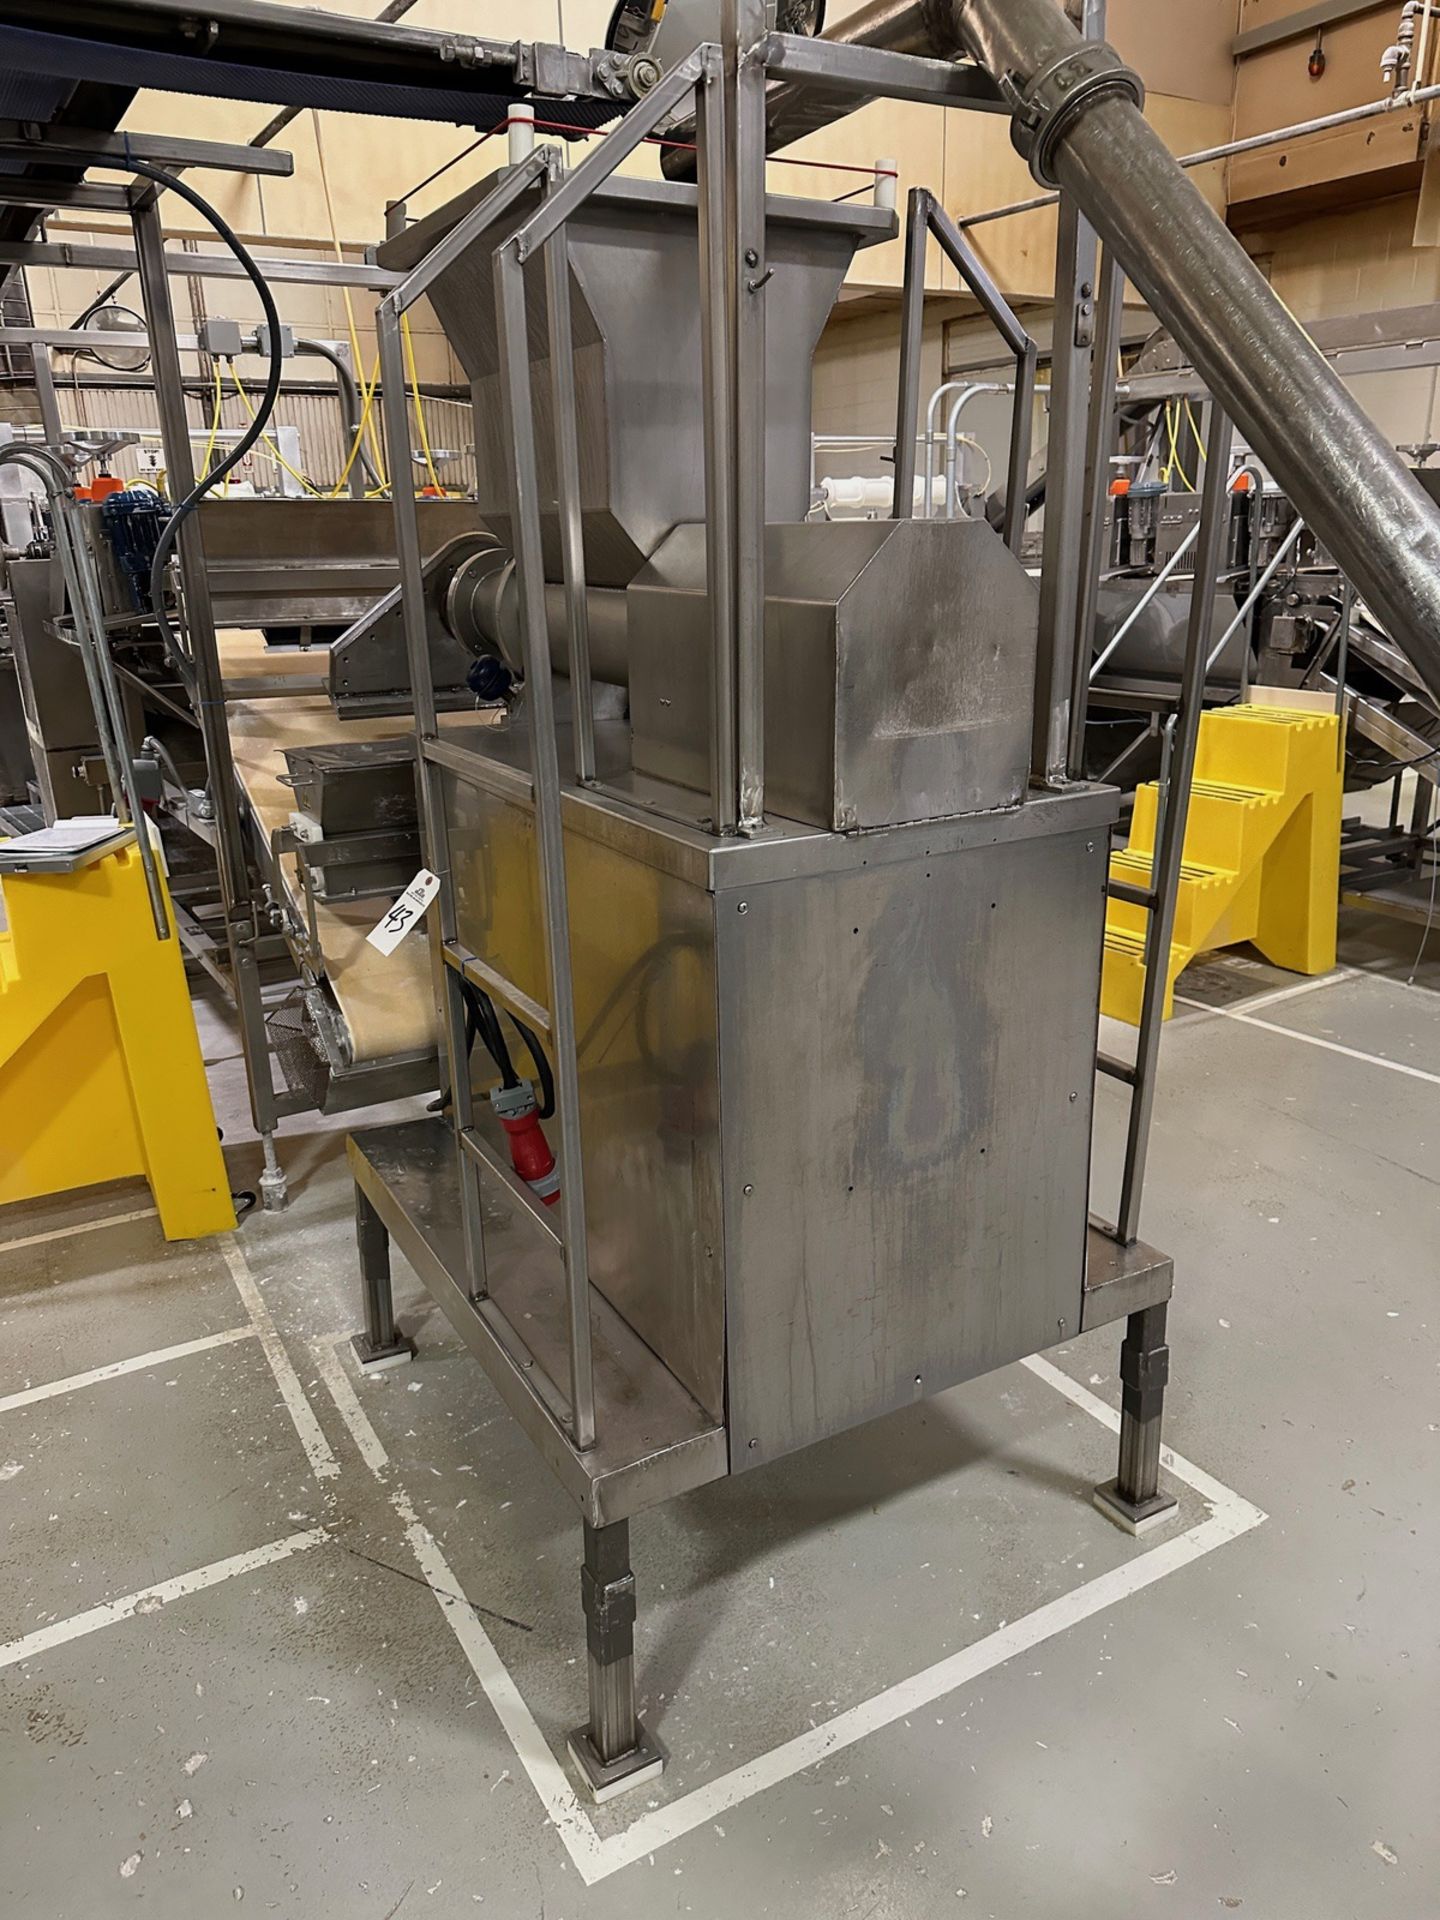 Stainless Steel Dough Sheet Extruder | Rig Fee $350 - Image 2 of 5